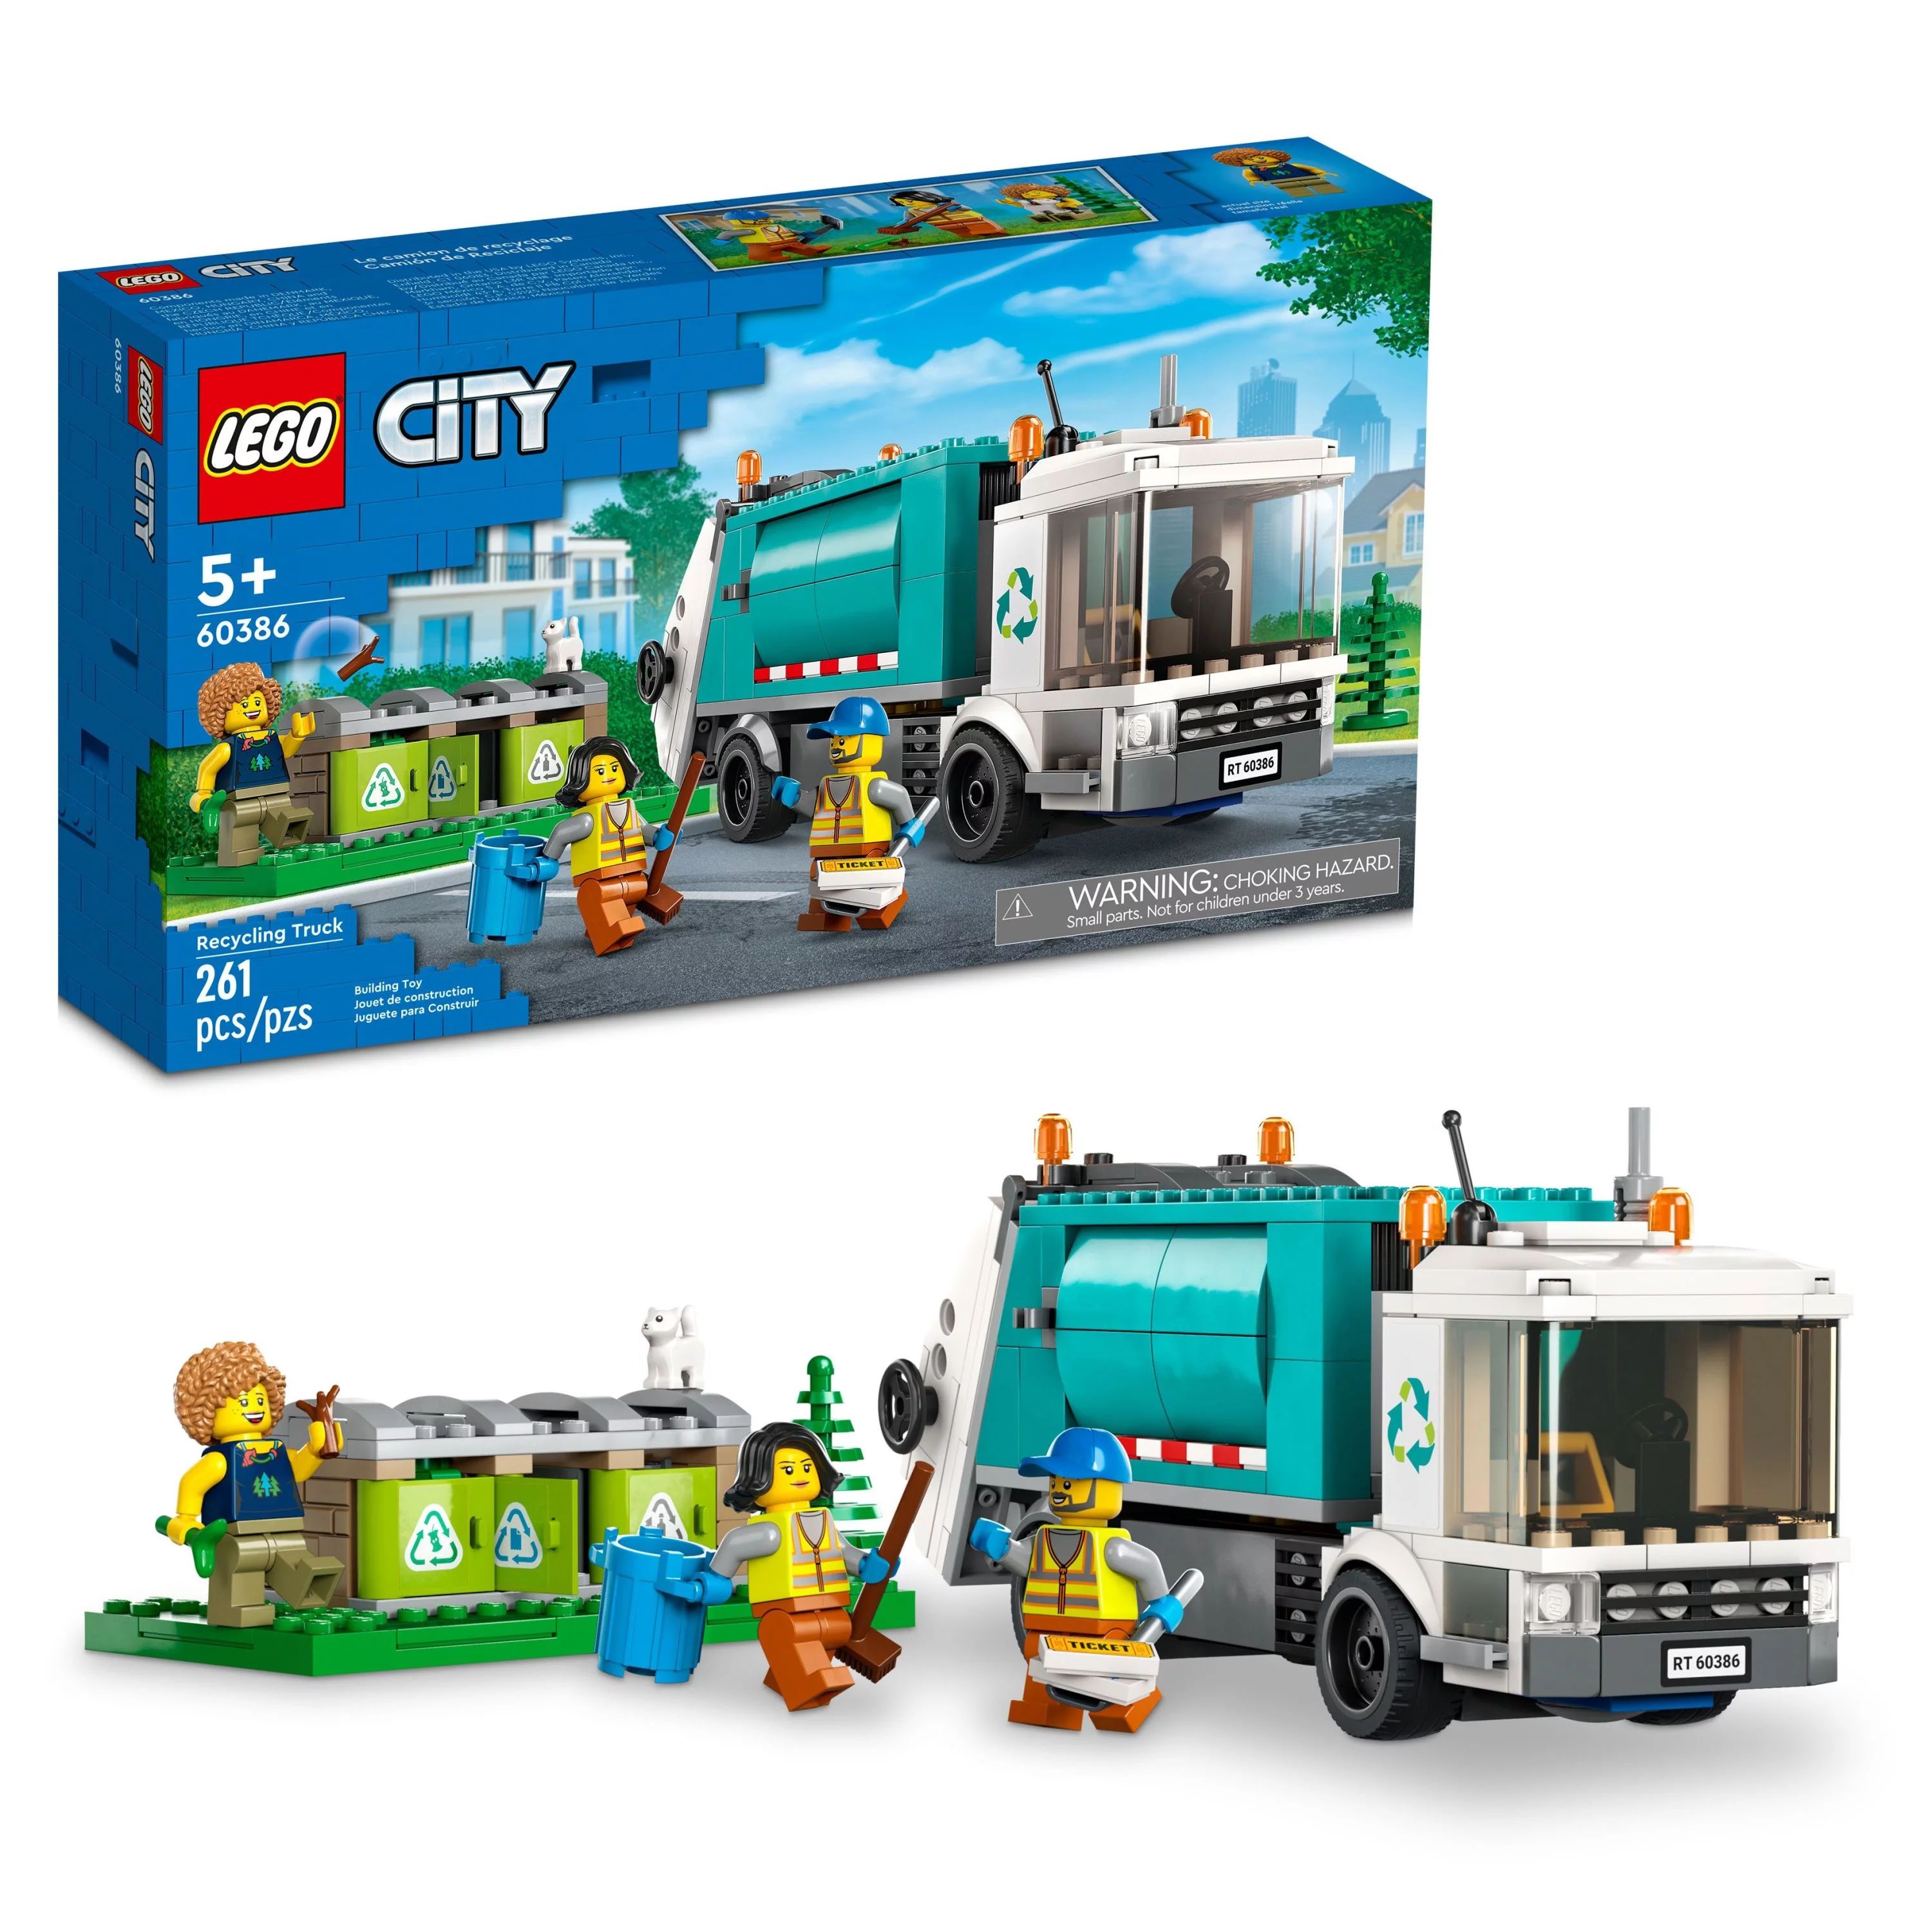 LEGO City Recycling Truck 60386, Toy Vehicle Set with 3 Sorting Bins, Gift Idea for Kids 5 Plus Y... | Walmart (US)